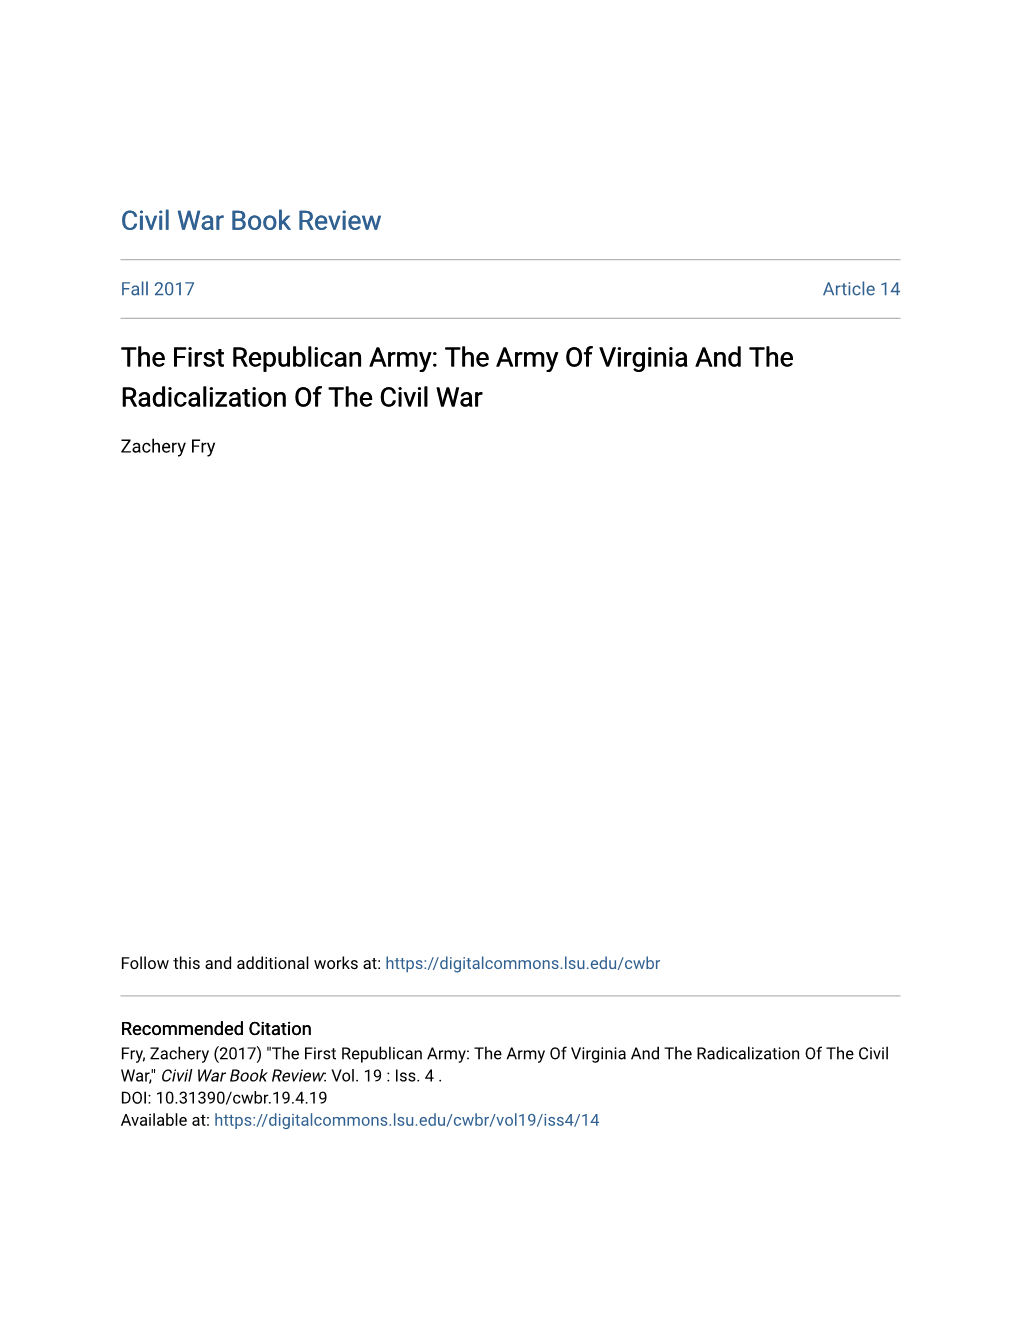 The First Republican Army: the Army of Virginia and the Radicalization of the Civil War